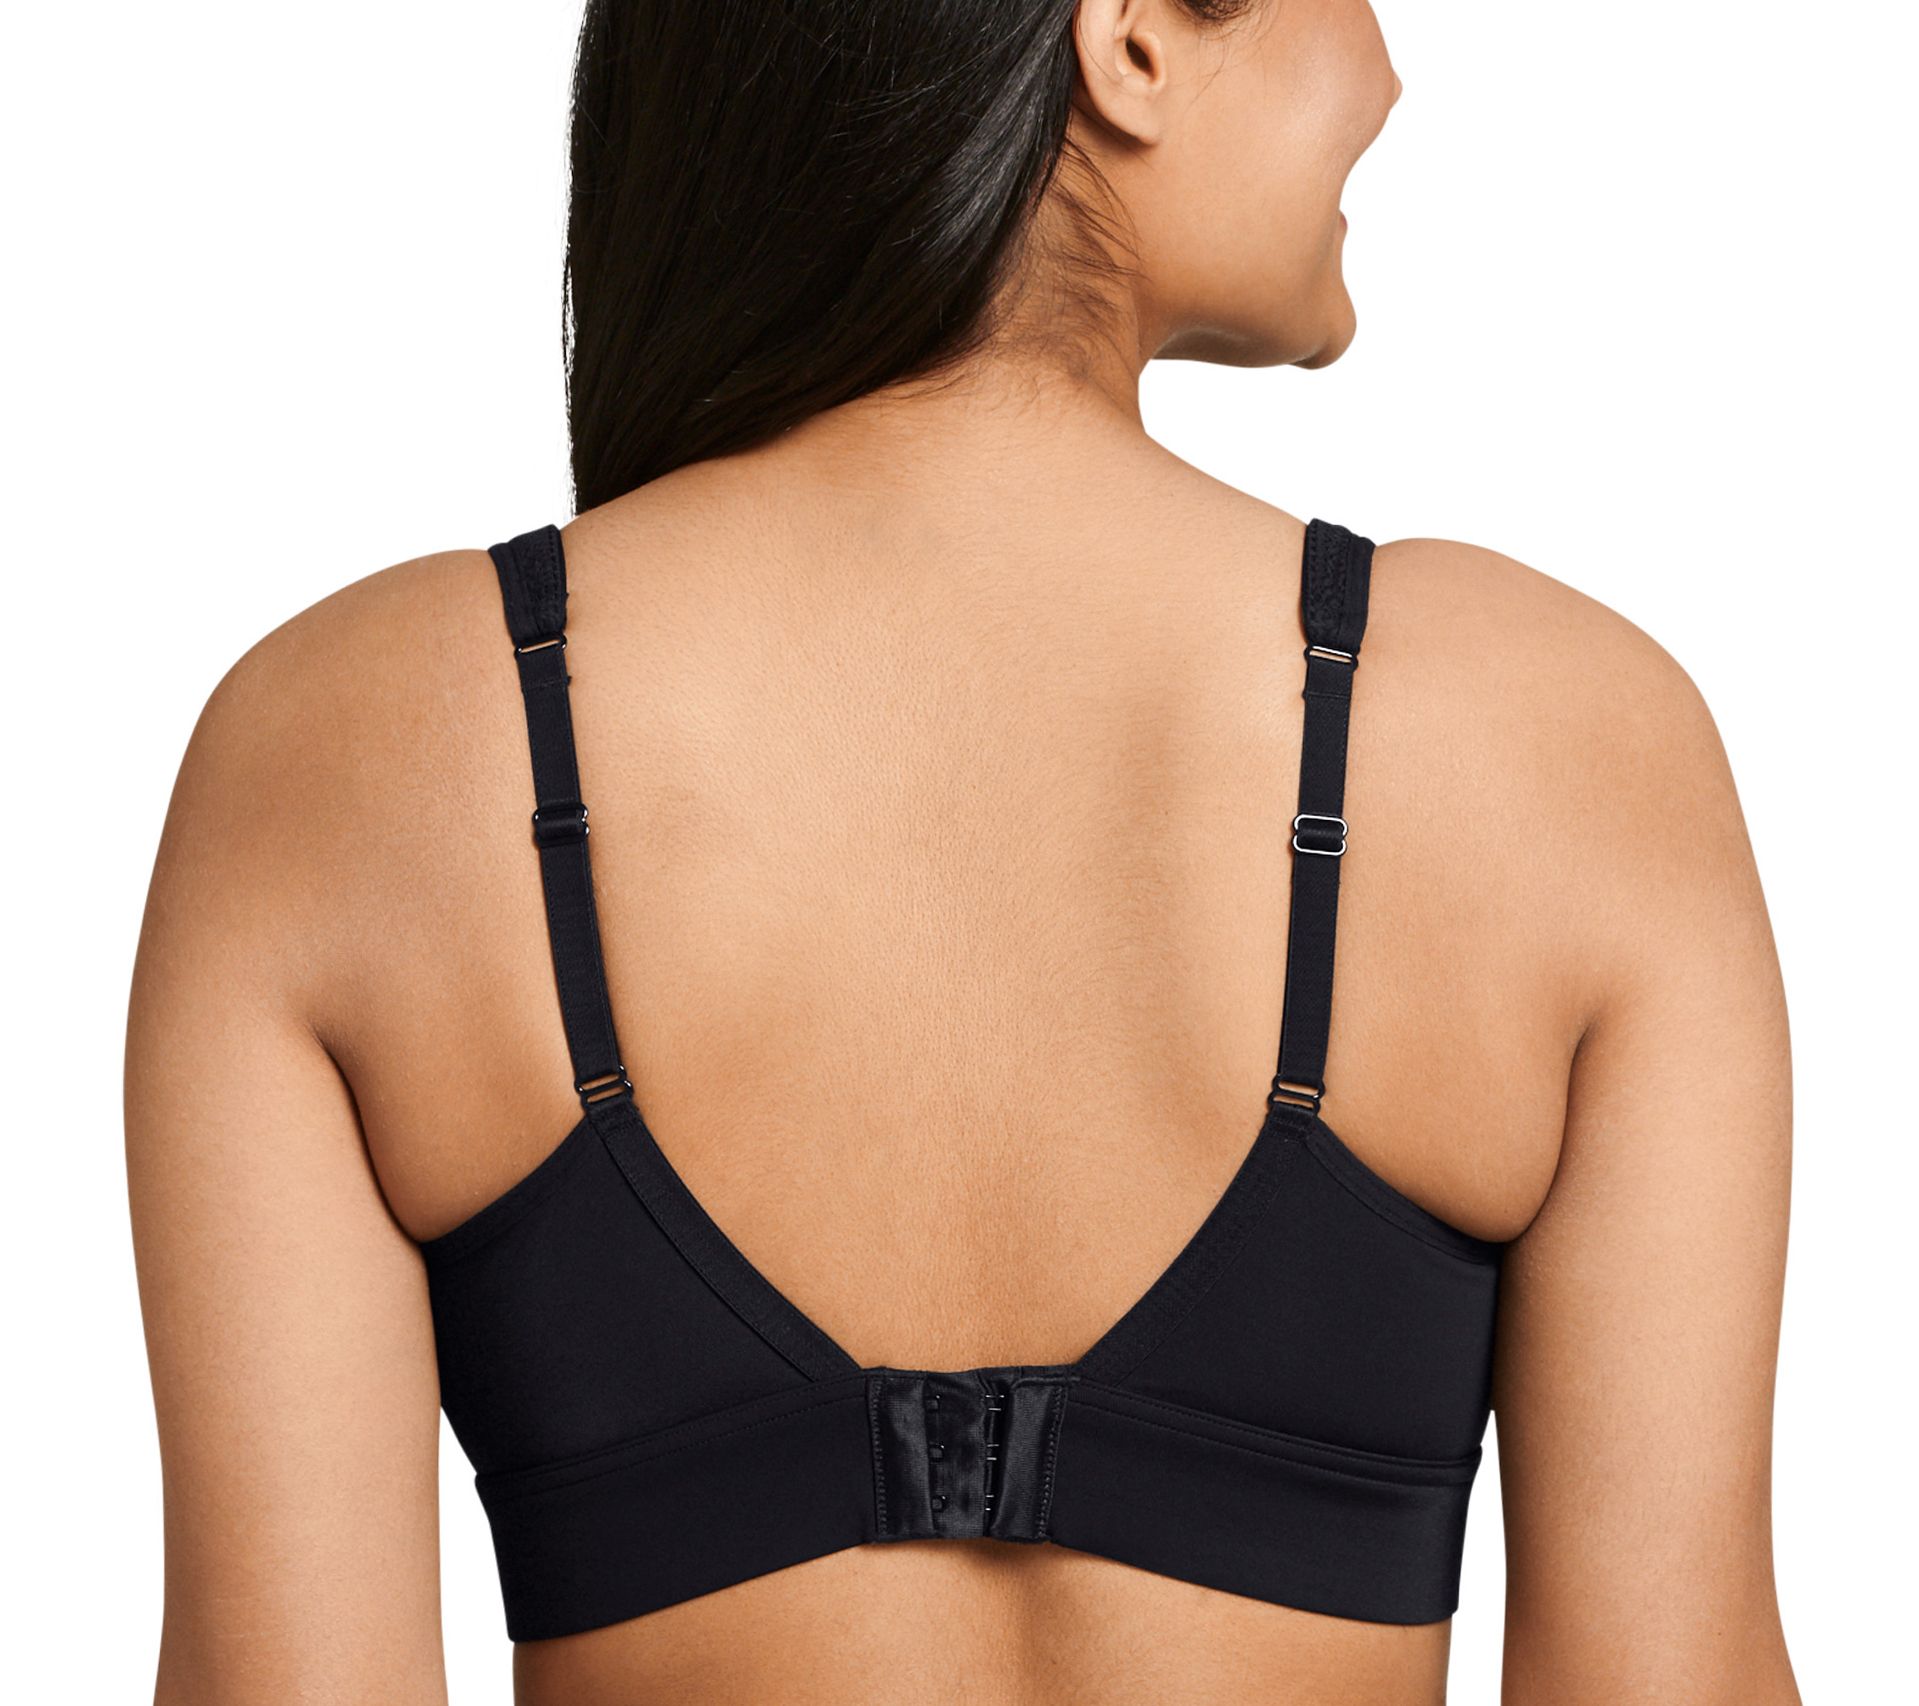 Smooth Cup Bras, Soft Touch Bras & Lingerie, Buy Online Today